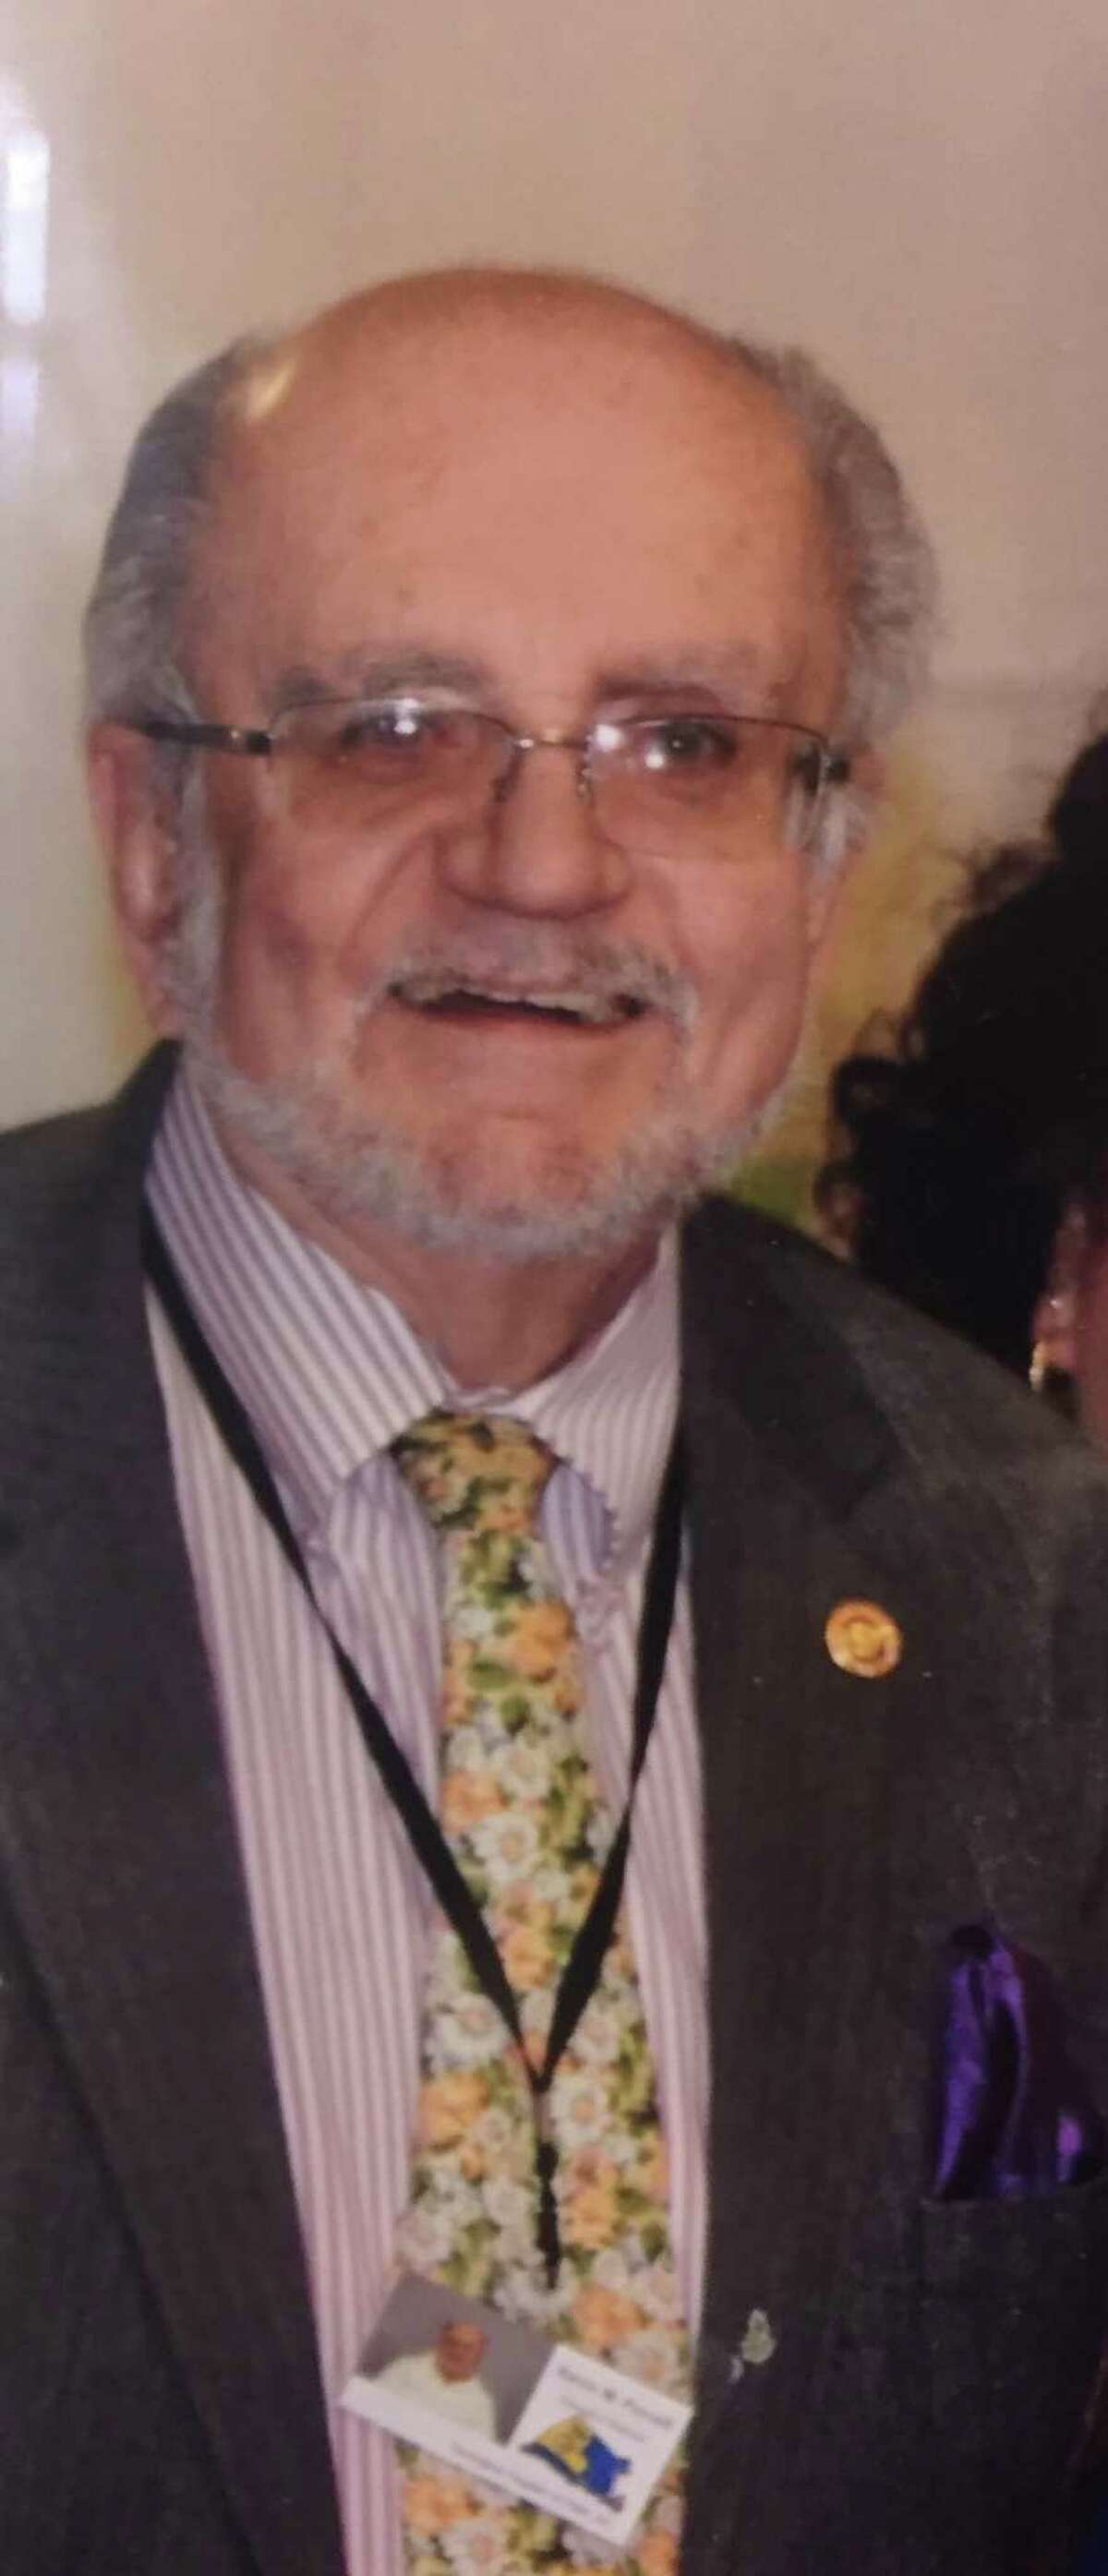 Kevin Purcell, a longtime resident who was a member of many community organizations including the Torrington Elks Club and the Torrington Rotary Club and was an advocate for the disabled, hungry and homeless, died Tuesday. He was 76.